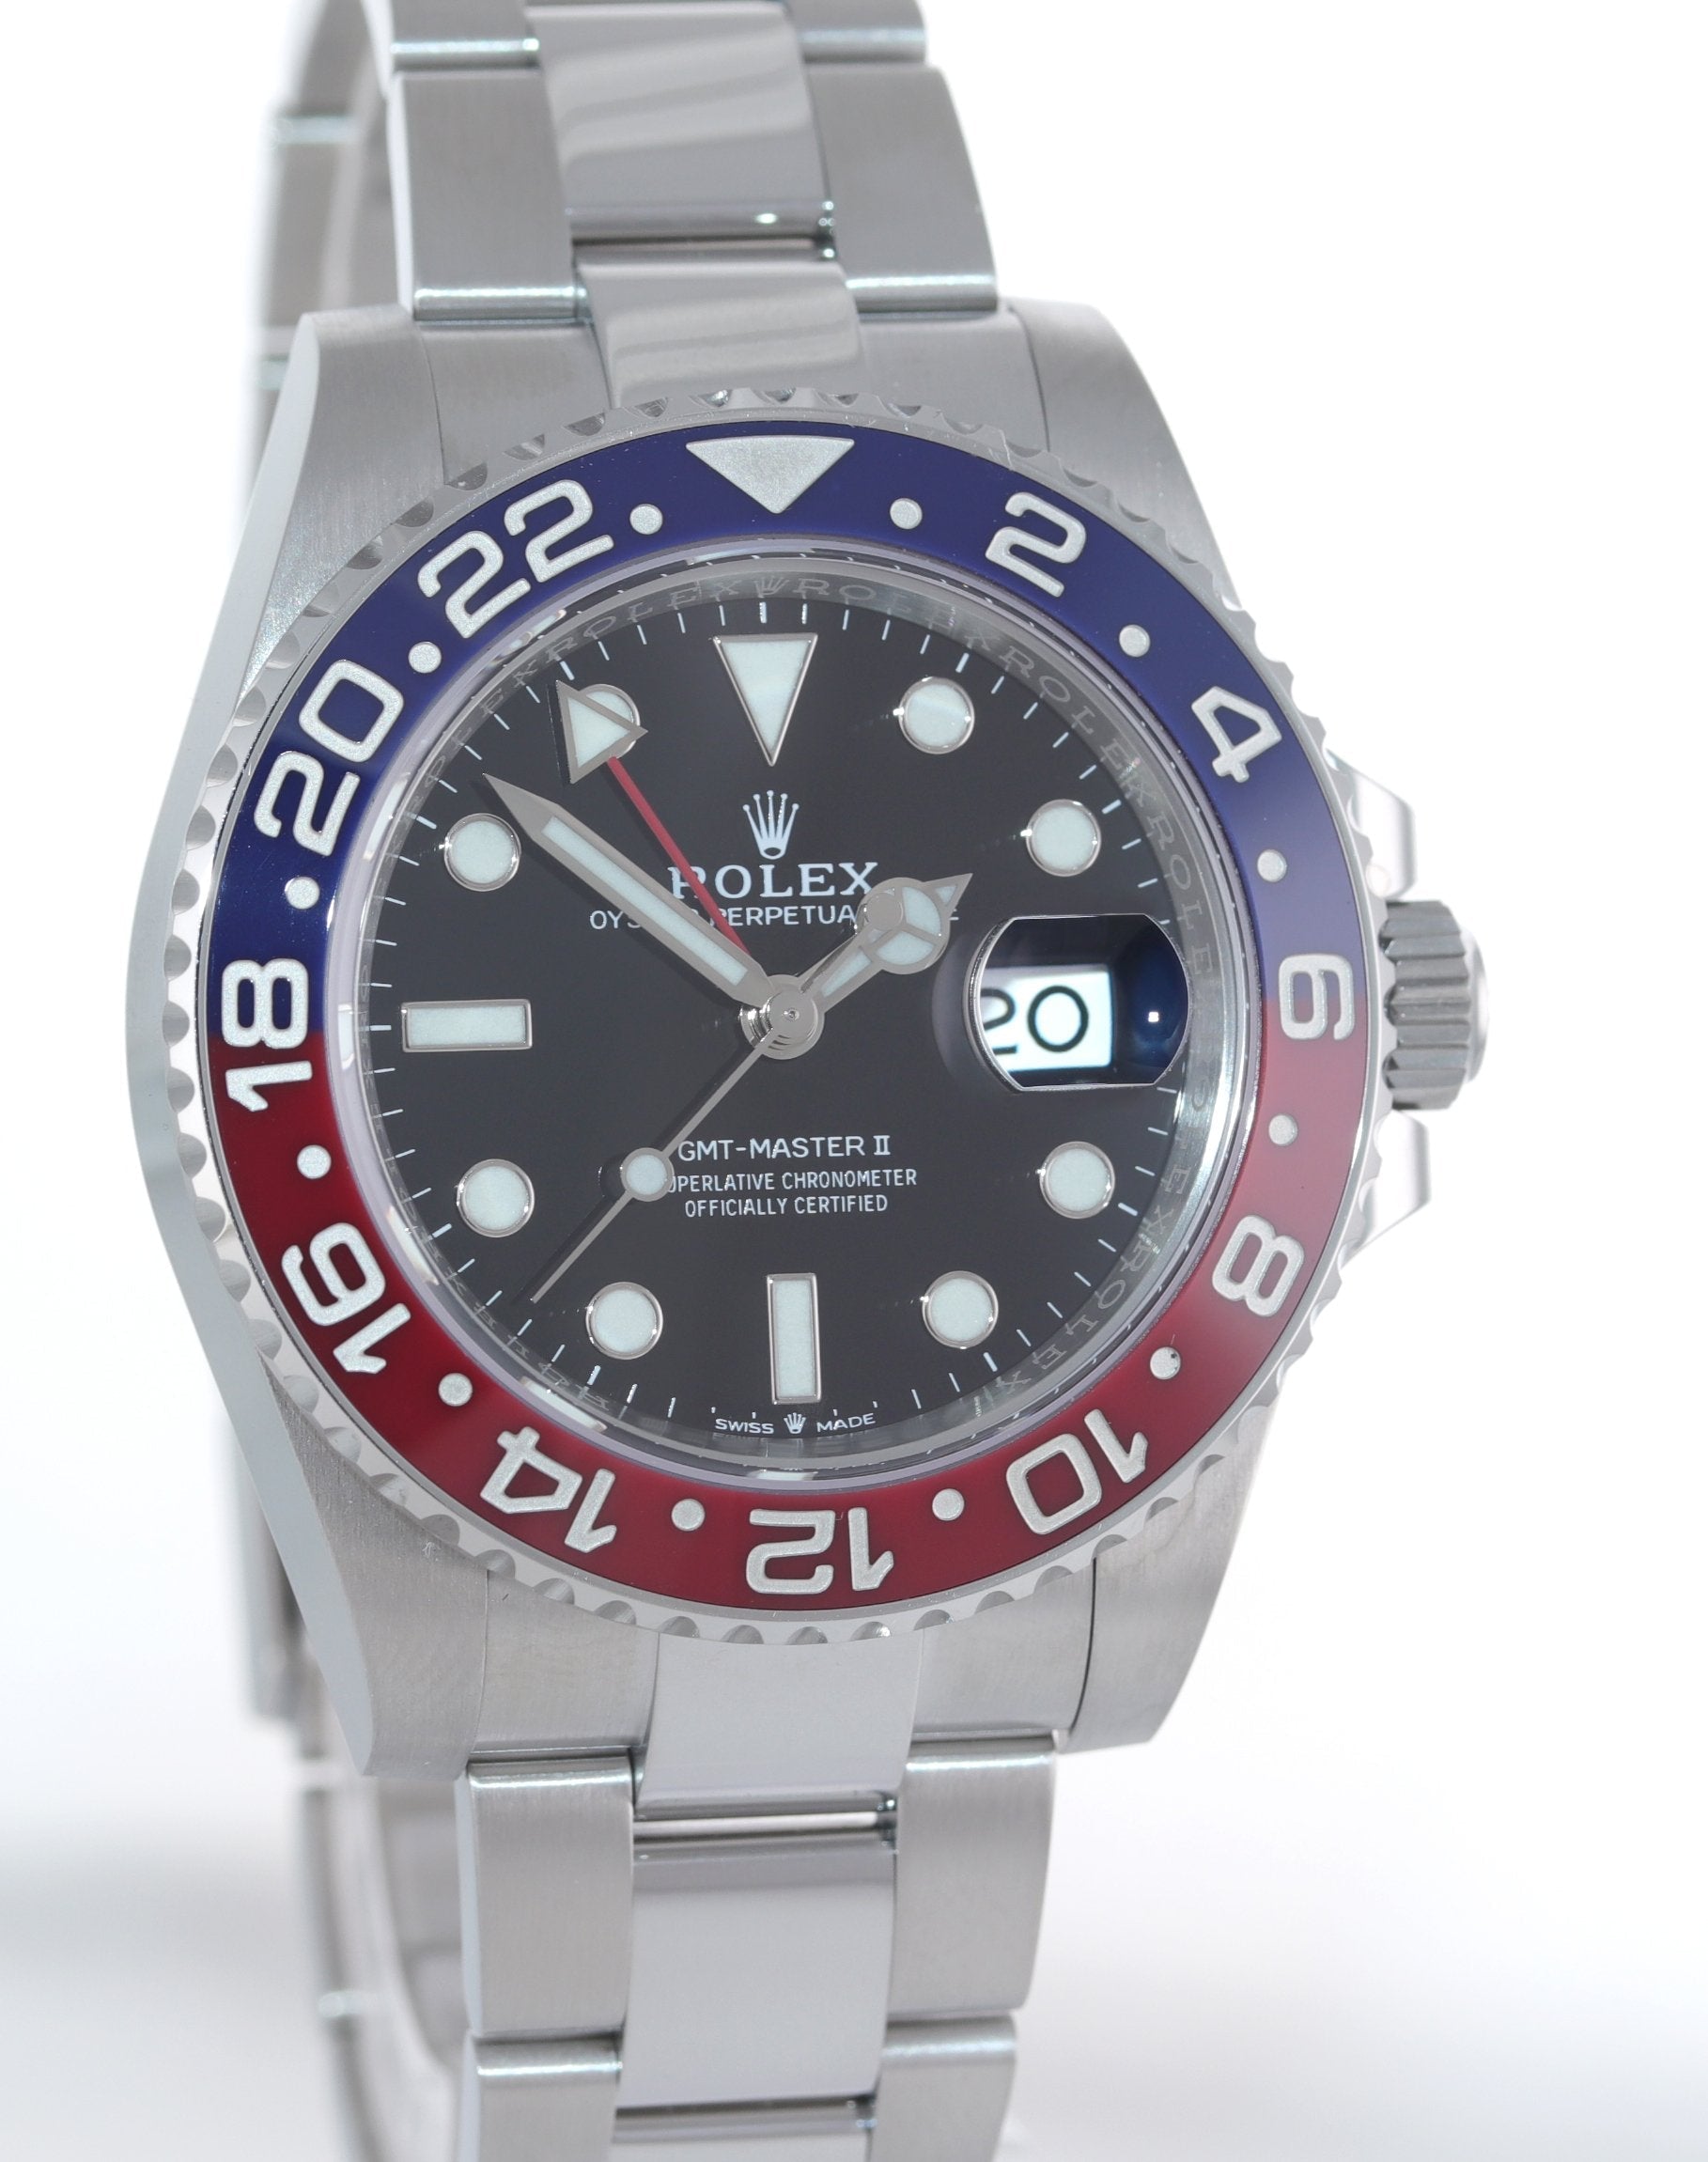 Dec 2021 PAPERS Rolex GMT Master PEPSI Blue Ceramic Oyster 126710 Watch Box